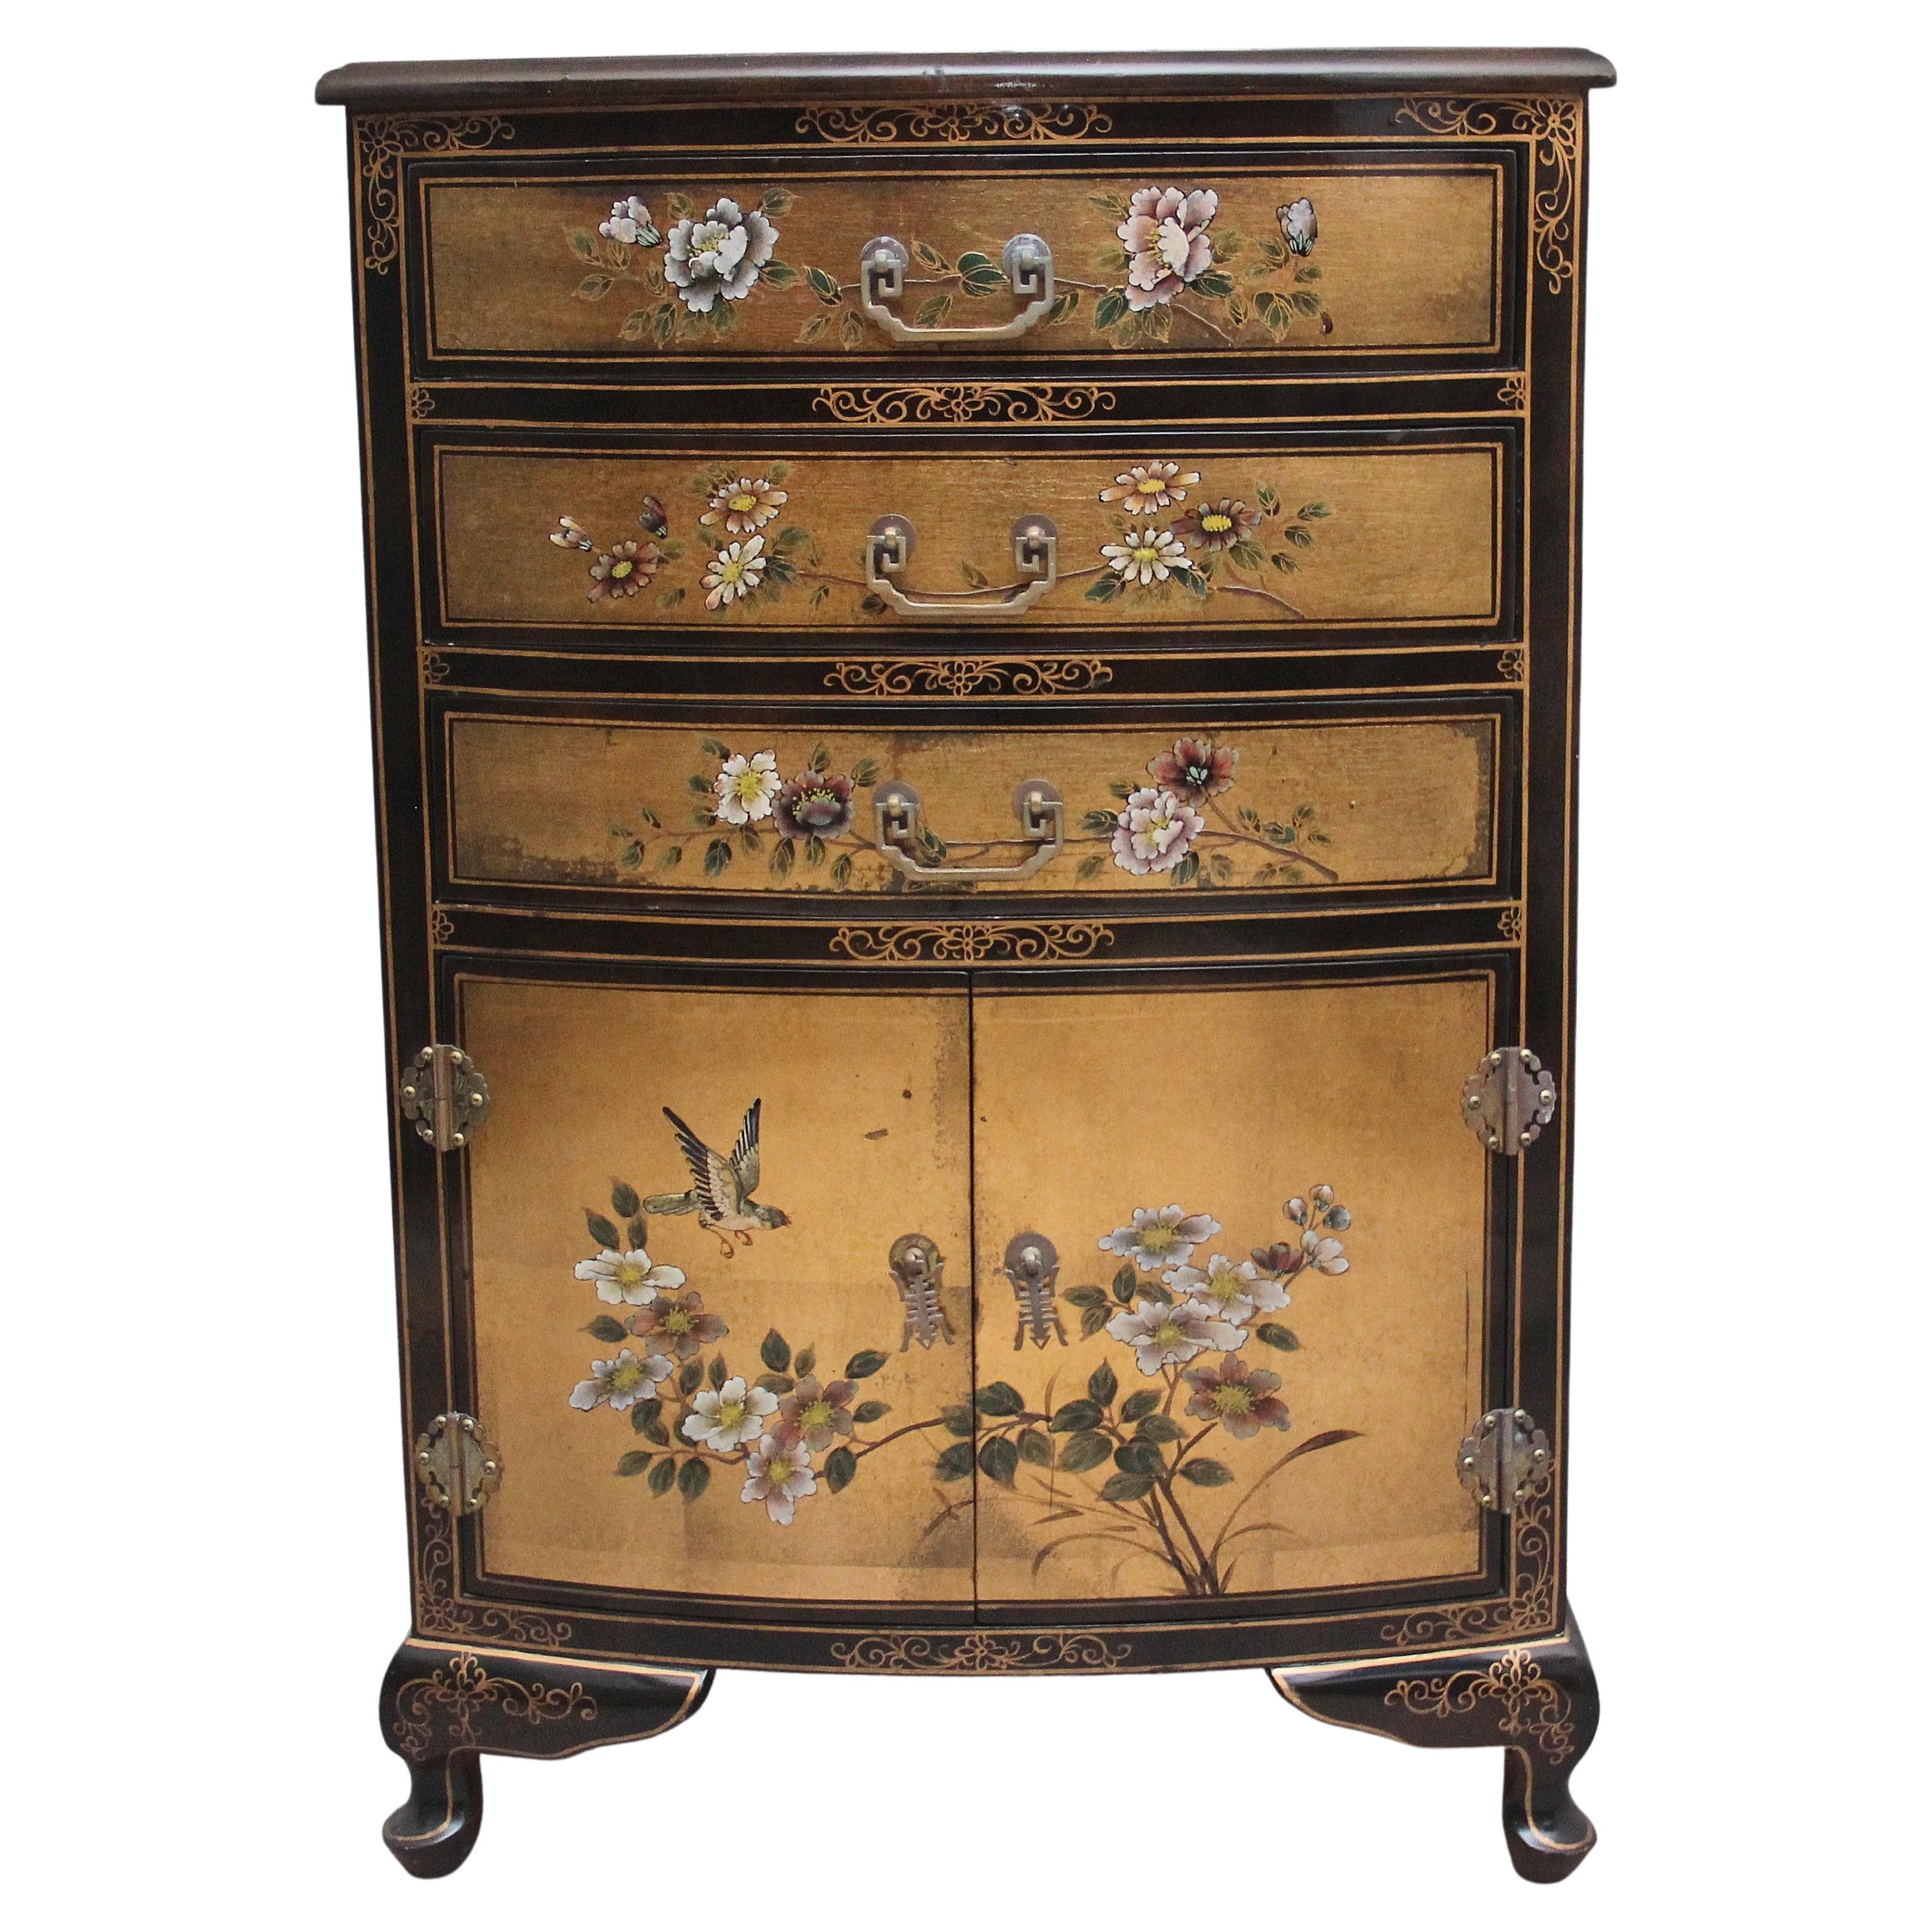 Decorative Mid-20th Century Painted and Lacquered Cabinet